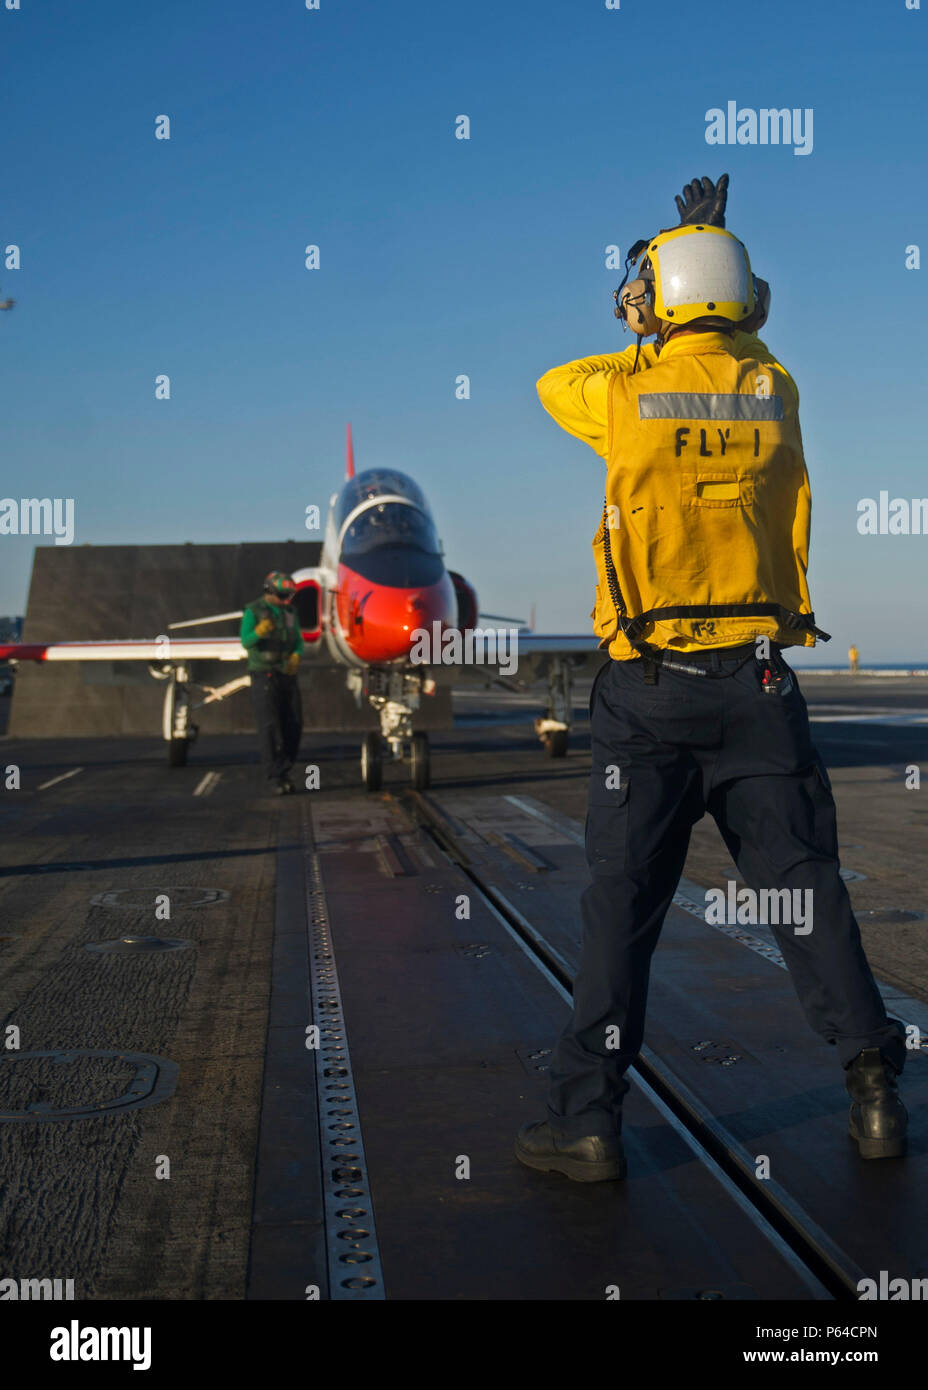 160424-N-VH385-039 ATLANTIC OCEAN (April 24, 2016) An aviation boatswain’s mate (handling) directs a T-45C Goshawk from Training Air Wing 2 onto the catapult of the aircraft carrier USS George Washington (CVN 73). Washington, homeported in Norfolk, is underway conducting carrier qualifications in the Atlantic Ocean. (U.S. Navy photo by Mass Communication Specialist 3rd Class Wyatt L. Anthony/Released) Stock Photo